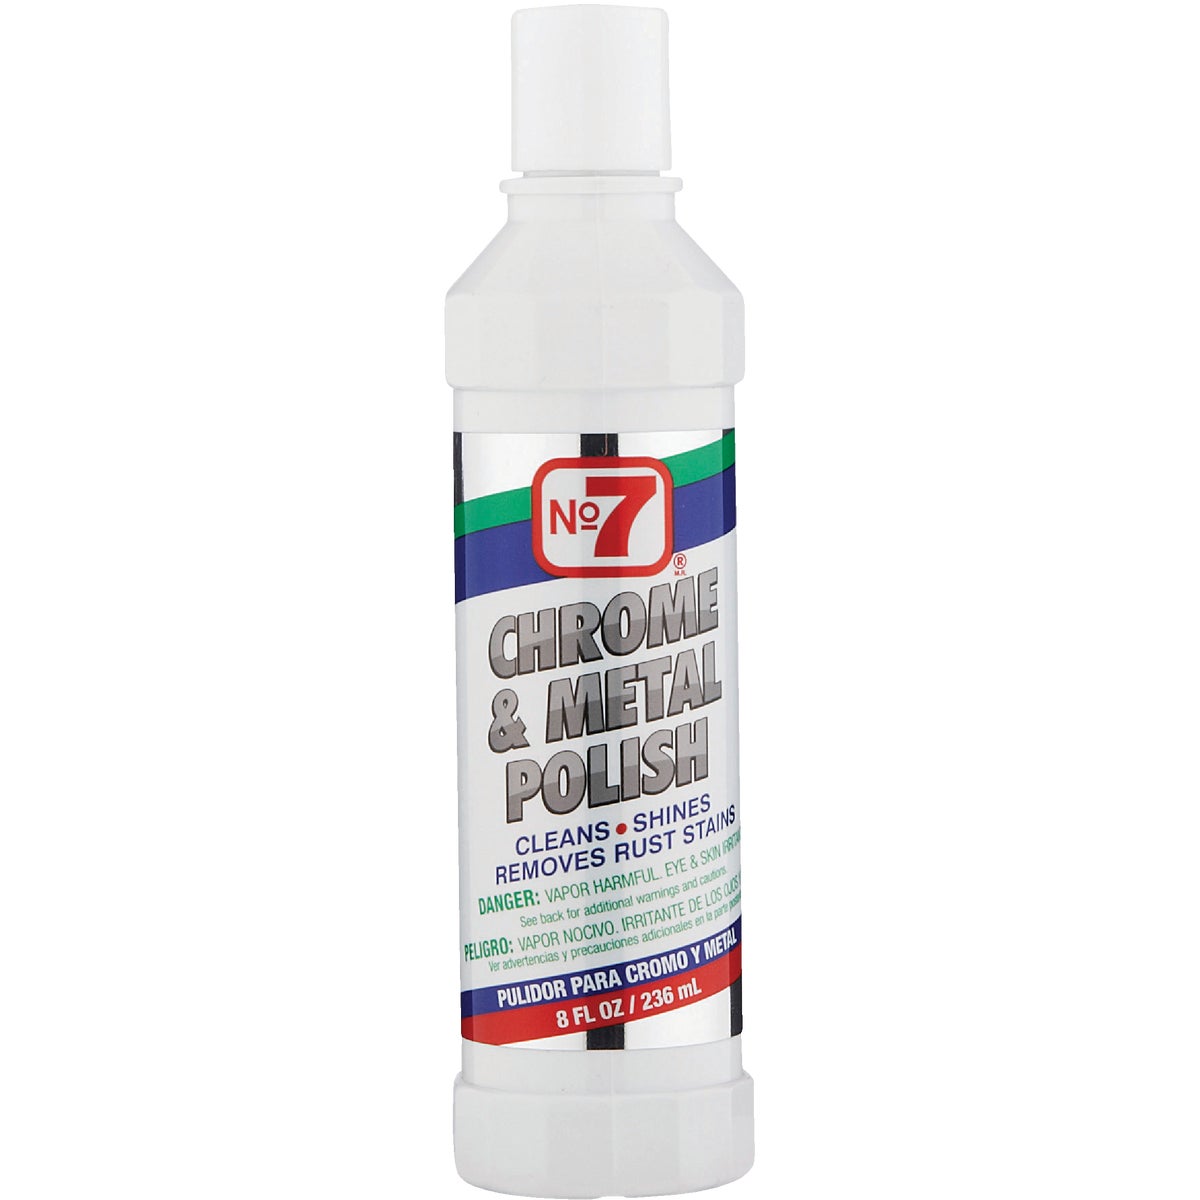 Item 574765, Cleans, polishes, and removes rust stains on chrome-plated bumpers and 